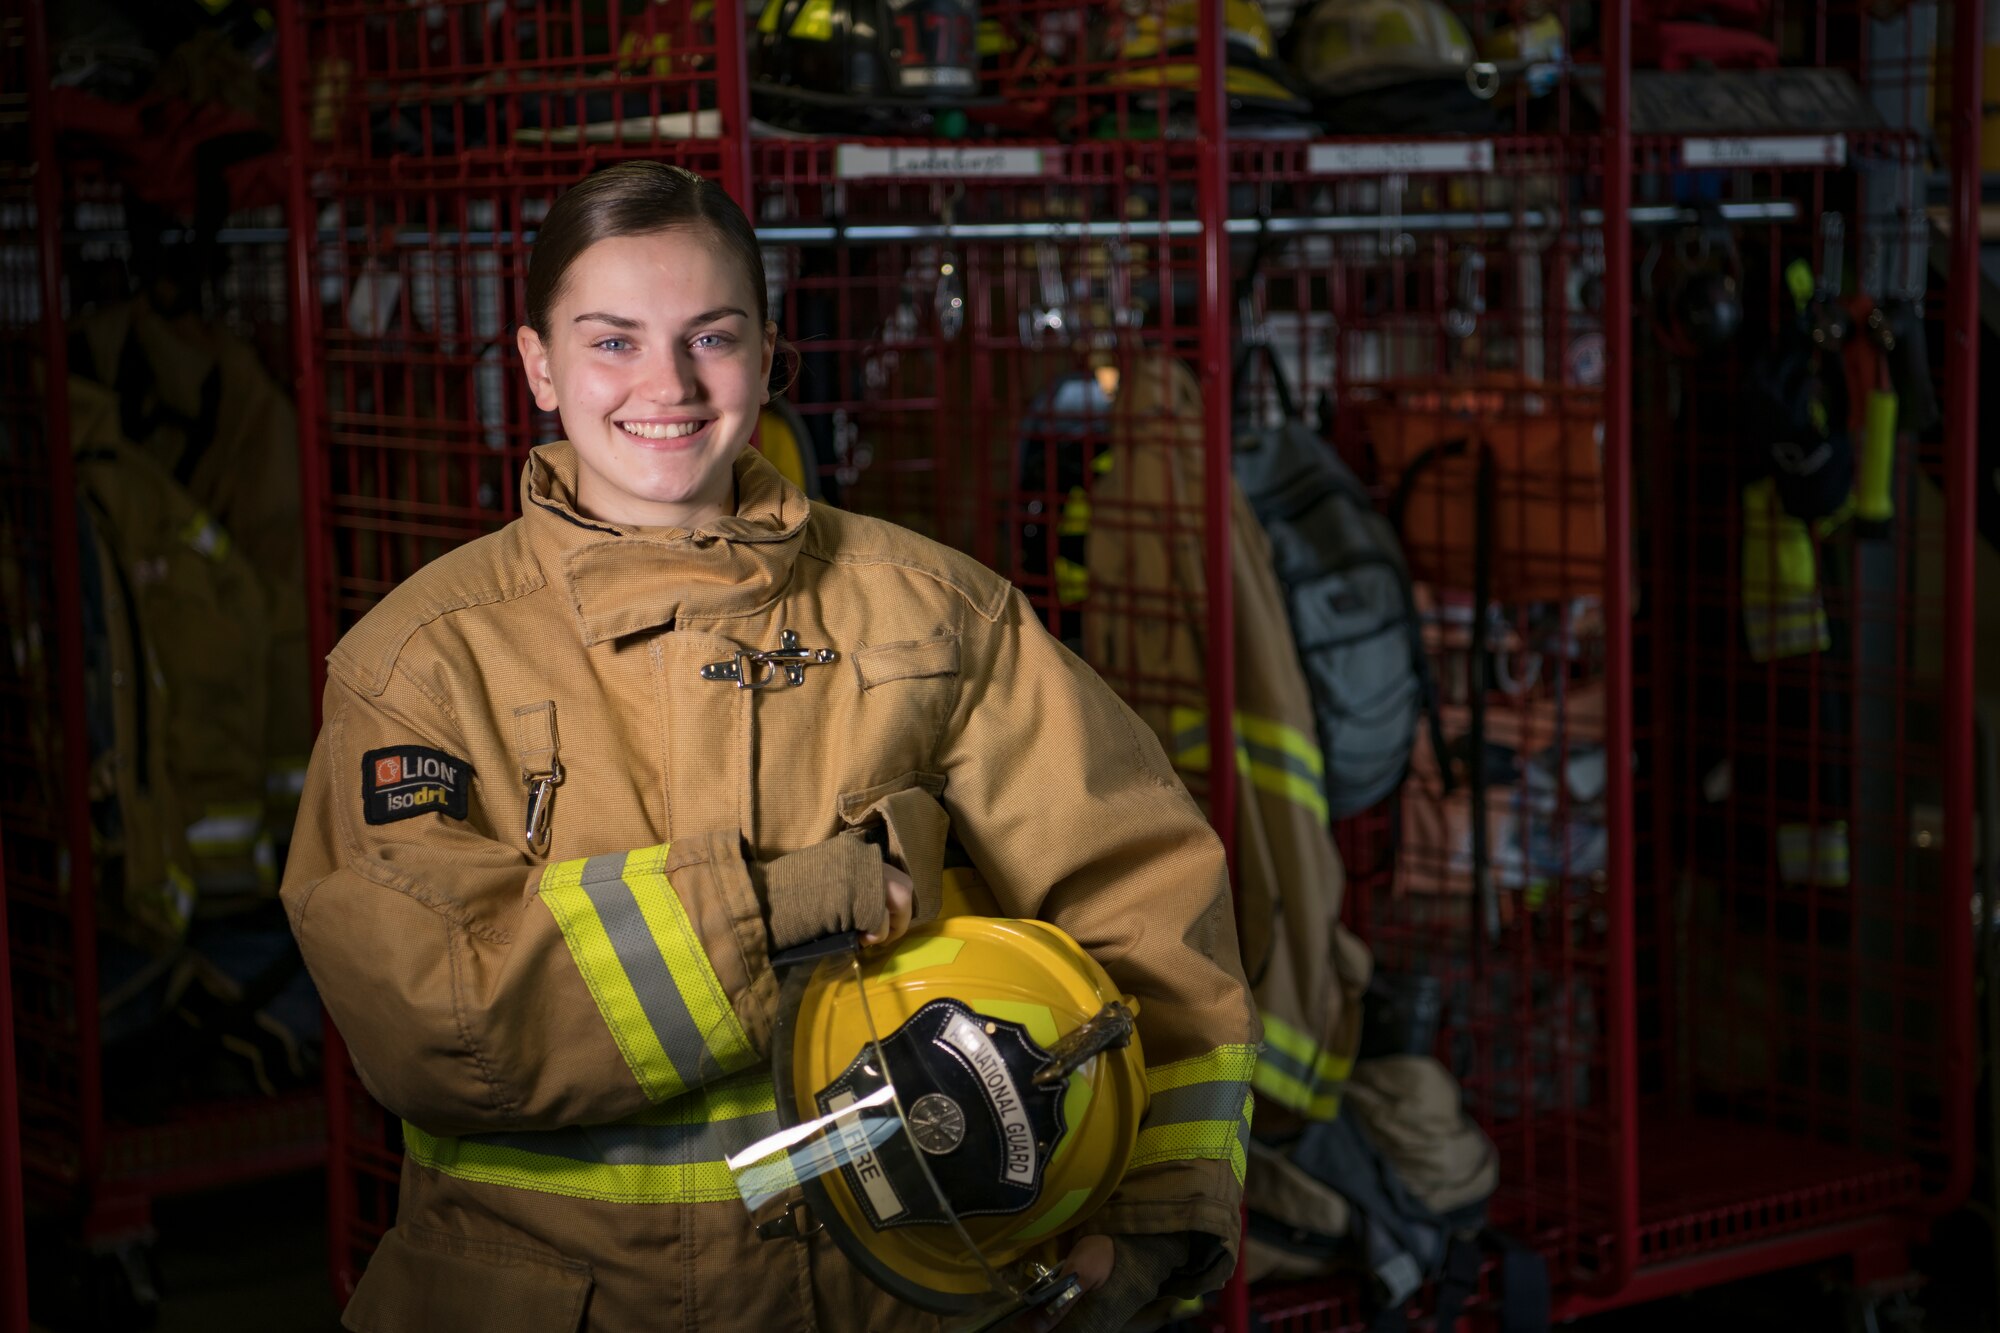 Airman in firefighter suit